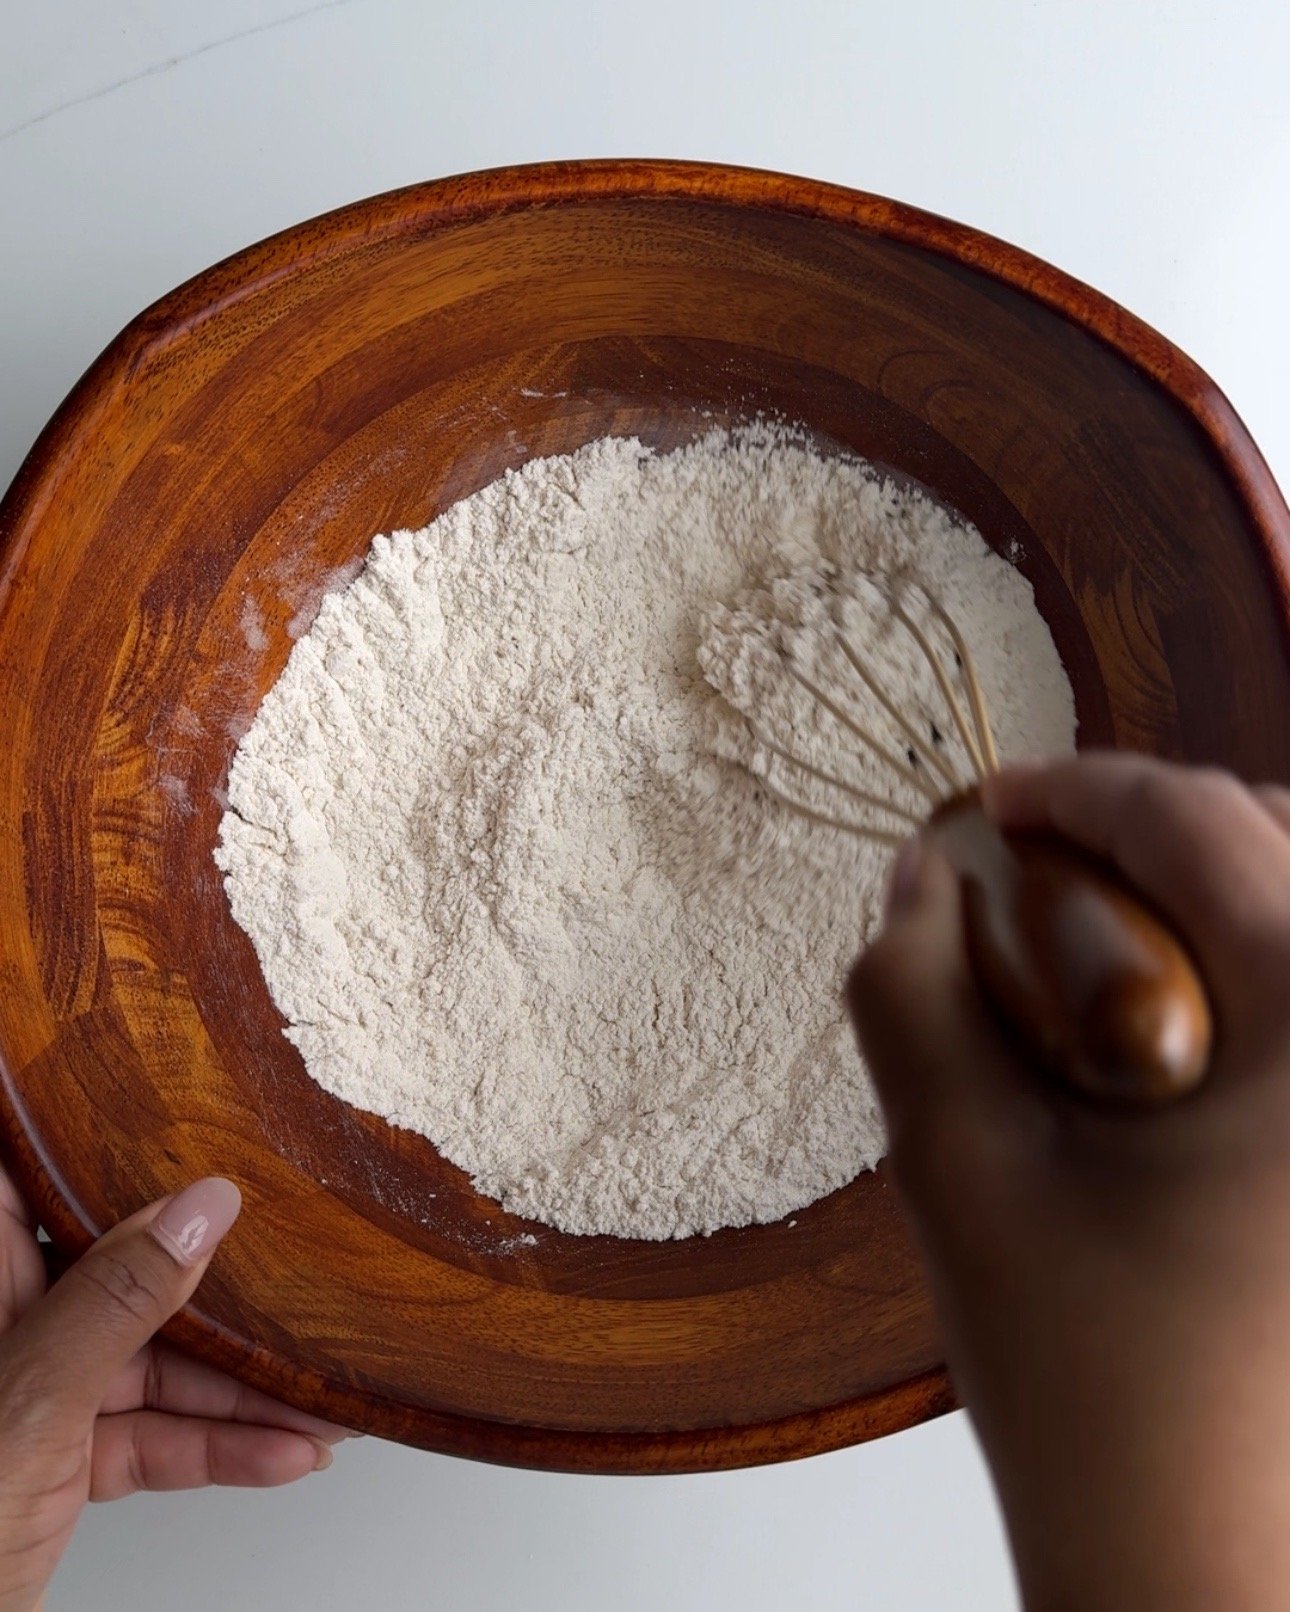 Mixing dry ingredients in a bowl with a whisk